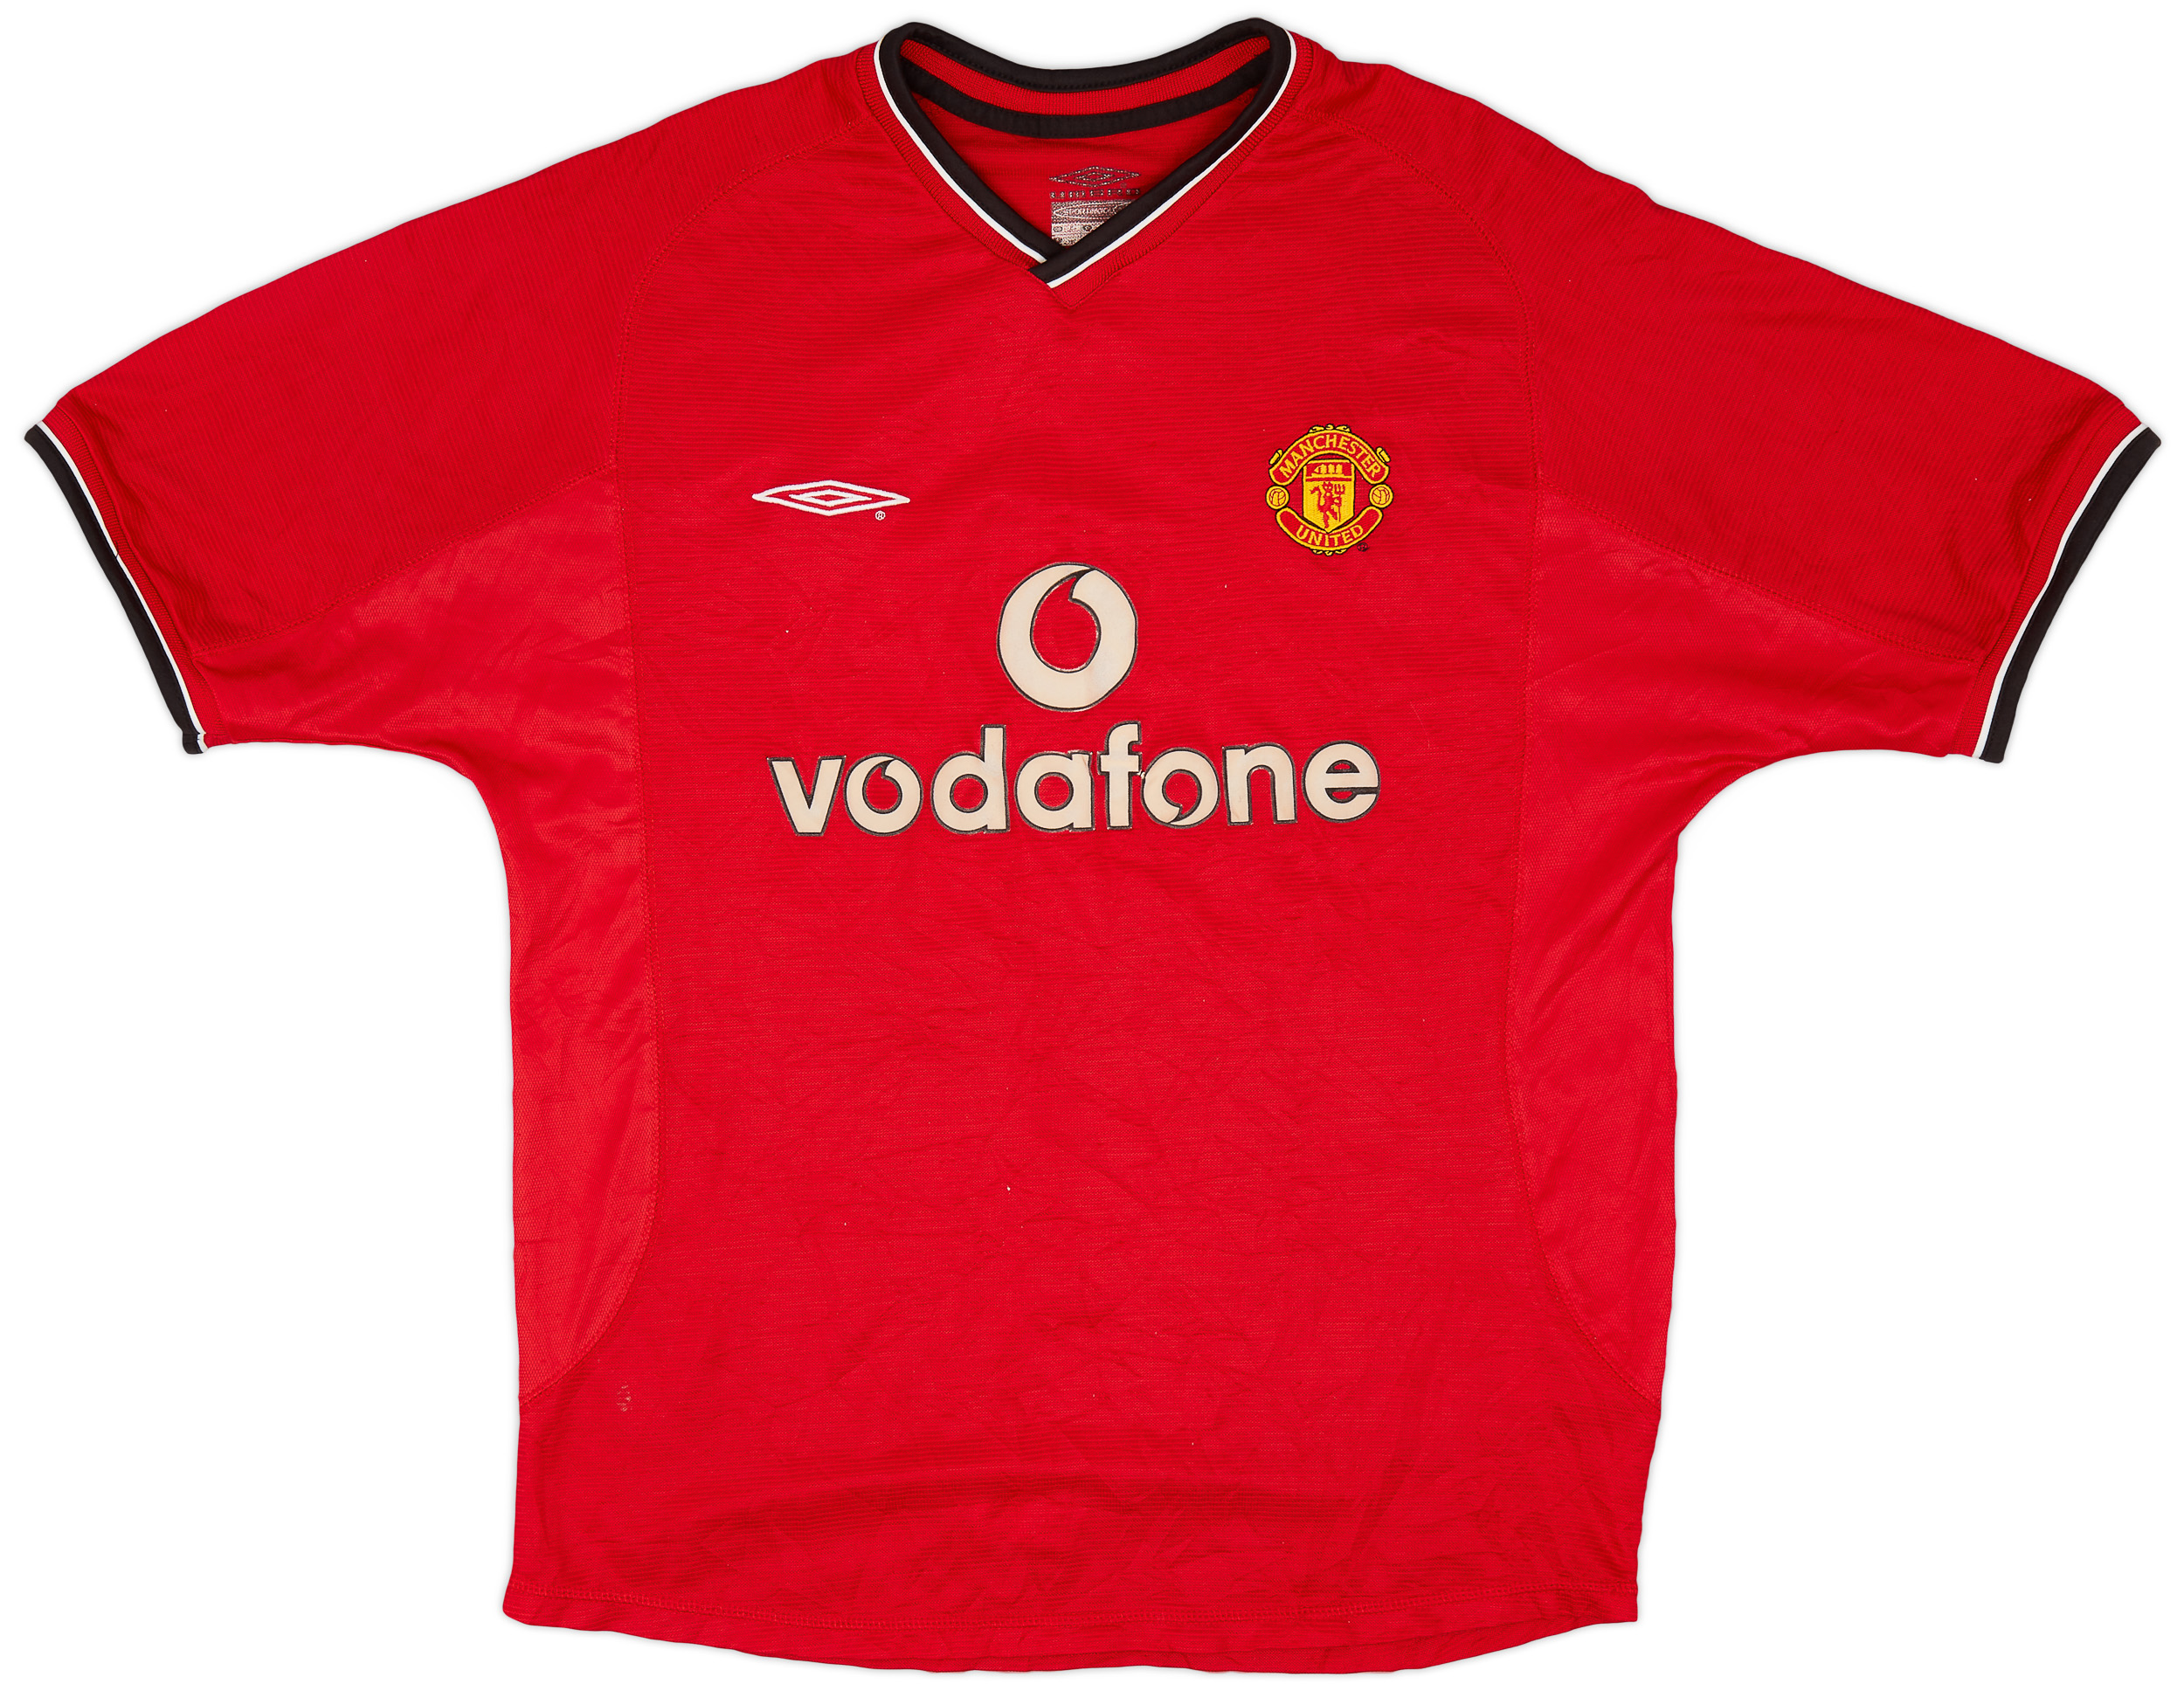 2000-02 Manchester United Home Shirt - 5/10 - ()